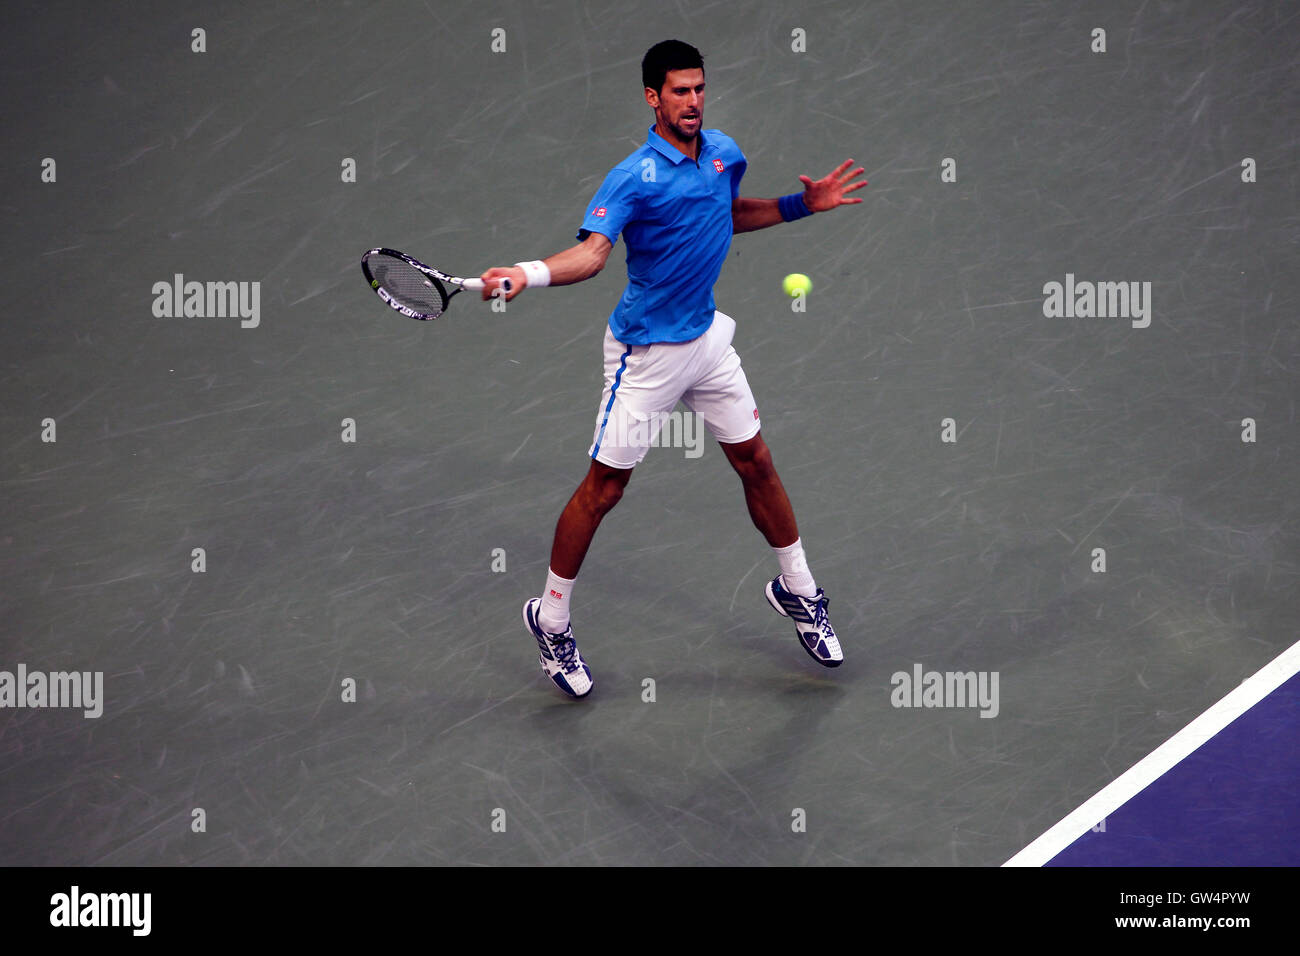 New York, United States. 11th Sep, 2016. Novak Djokovic strikes a forehand during the United States Open Tennis Championships Final against Switzerland's Stan Warwinka at Flushing Meadows, New York on Sunday, September 11th. Credit:  Adam Stoltman/Alamy Live News Stock Photo